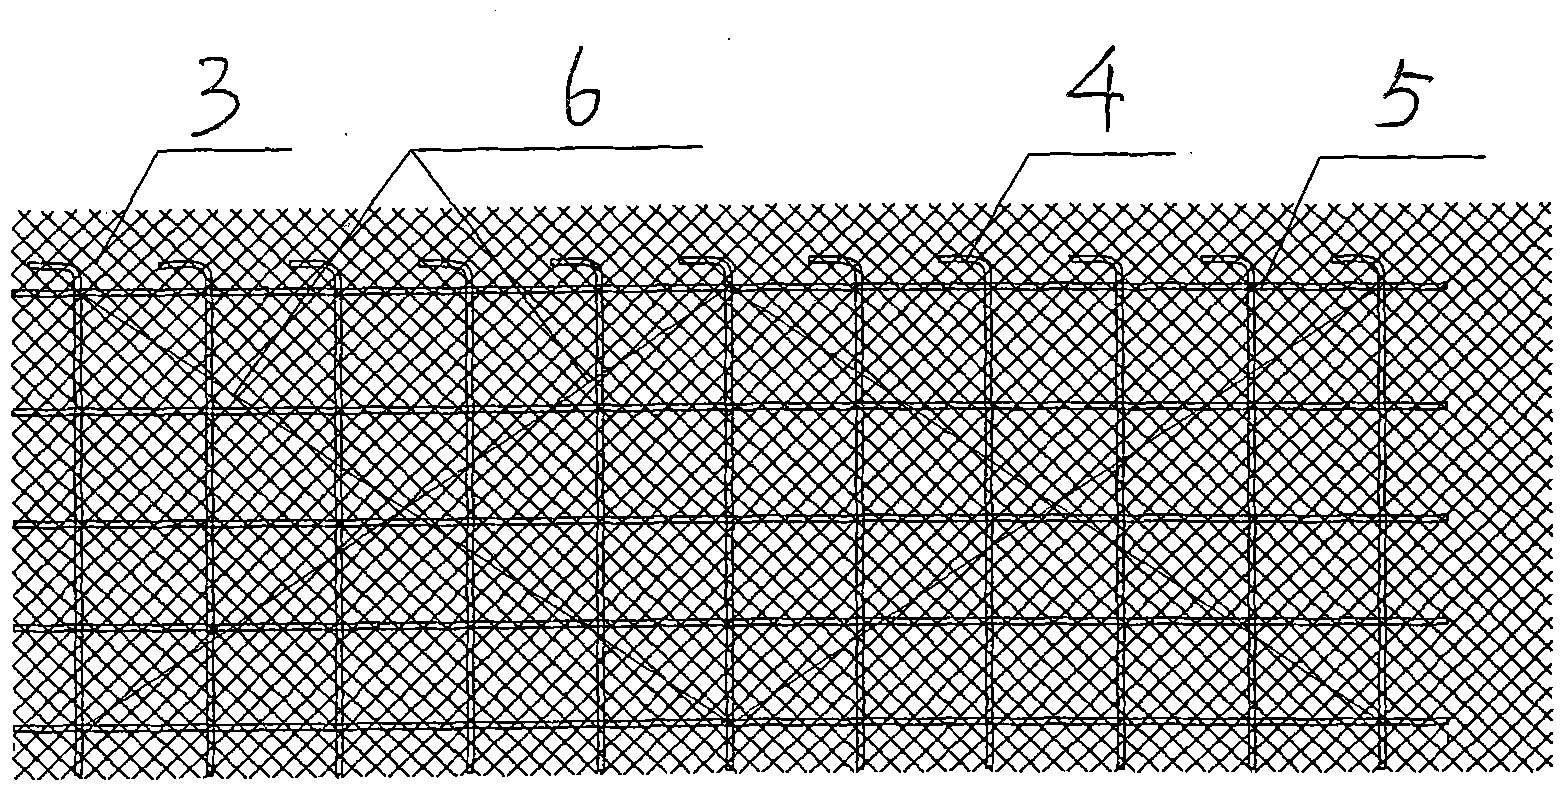 Construction method of sole plate post-poured strip form bracing system